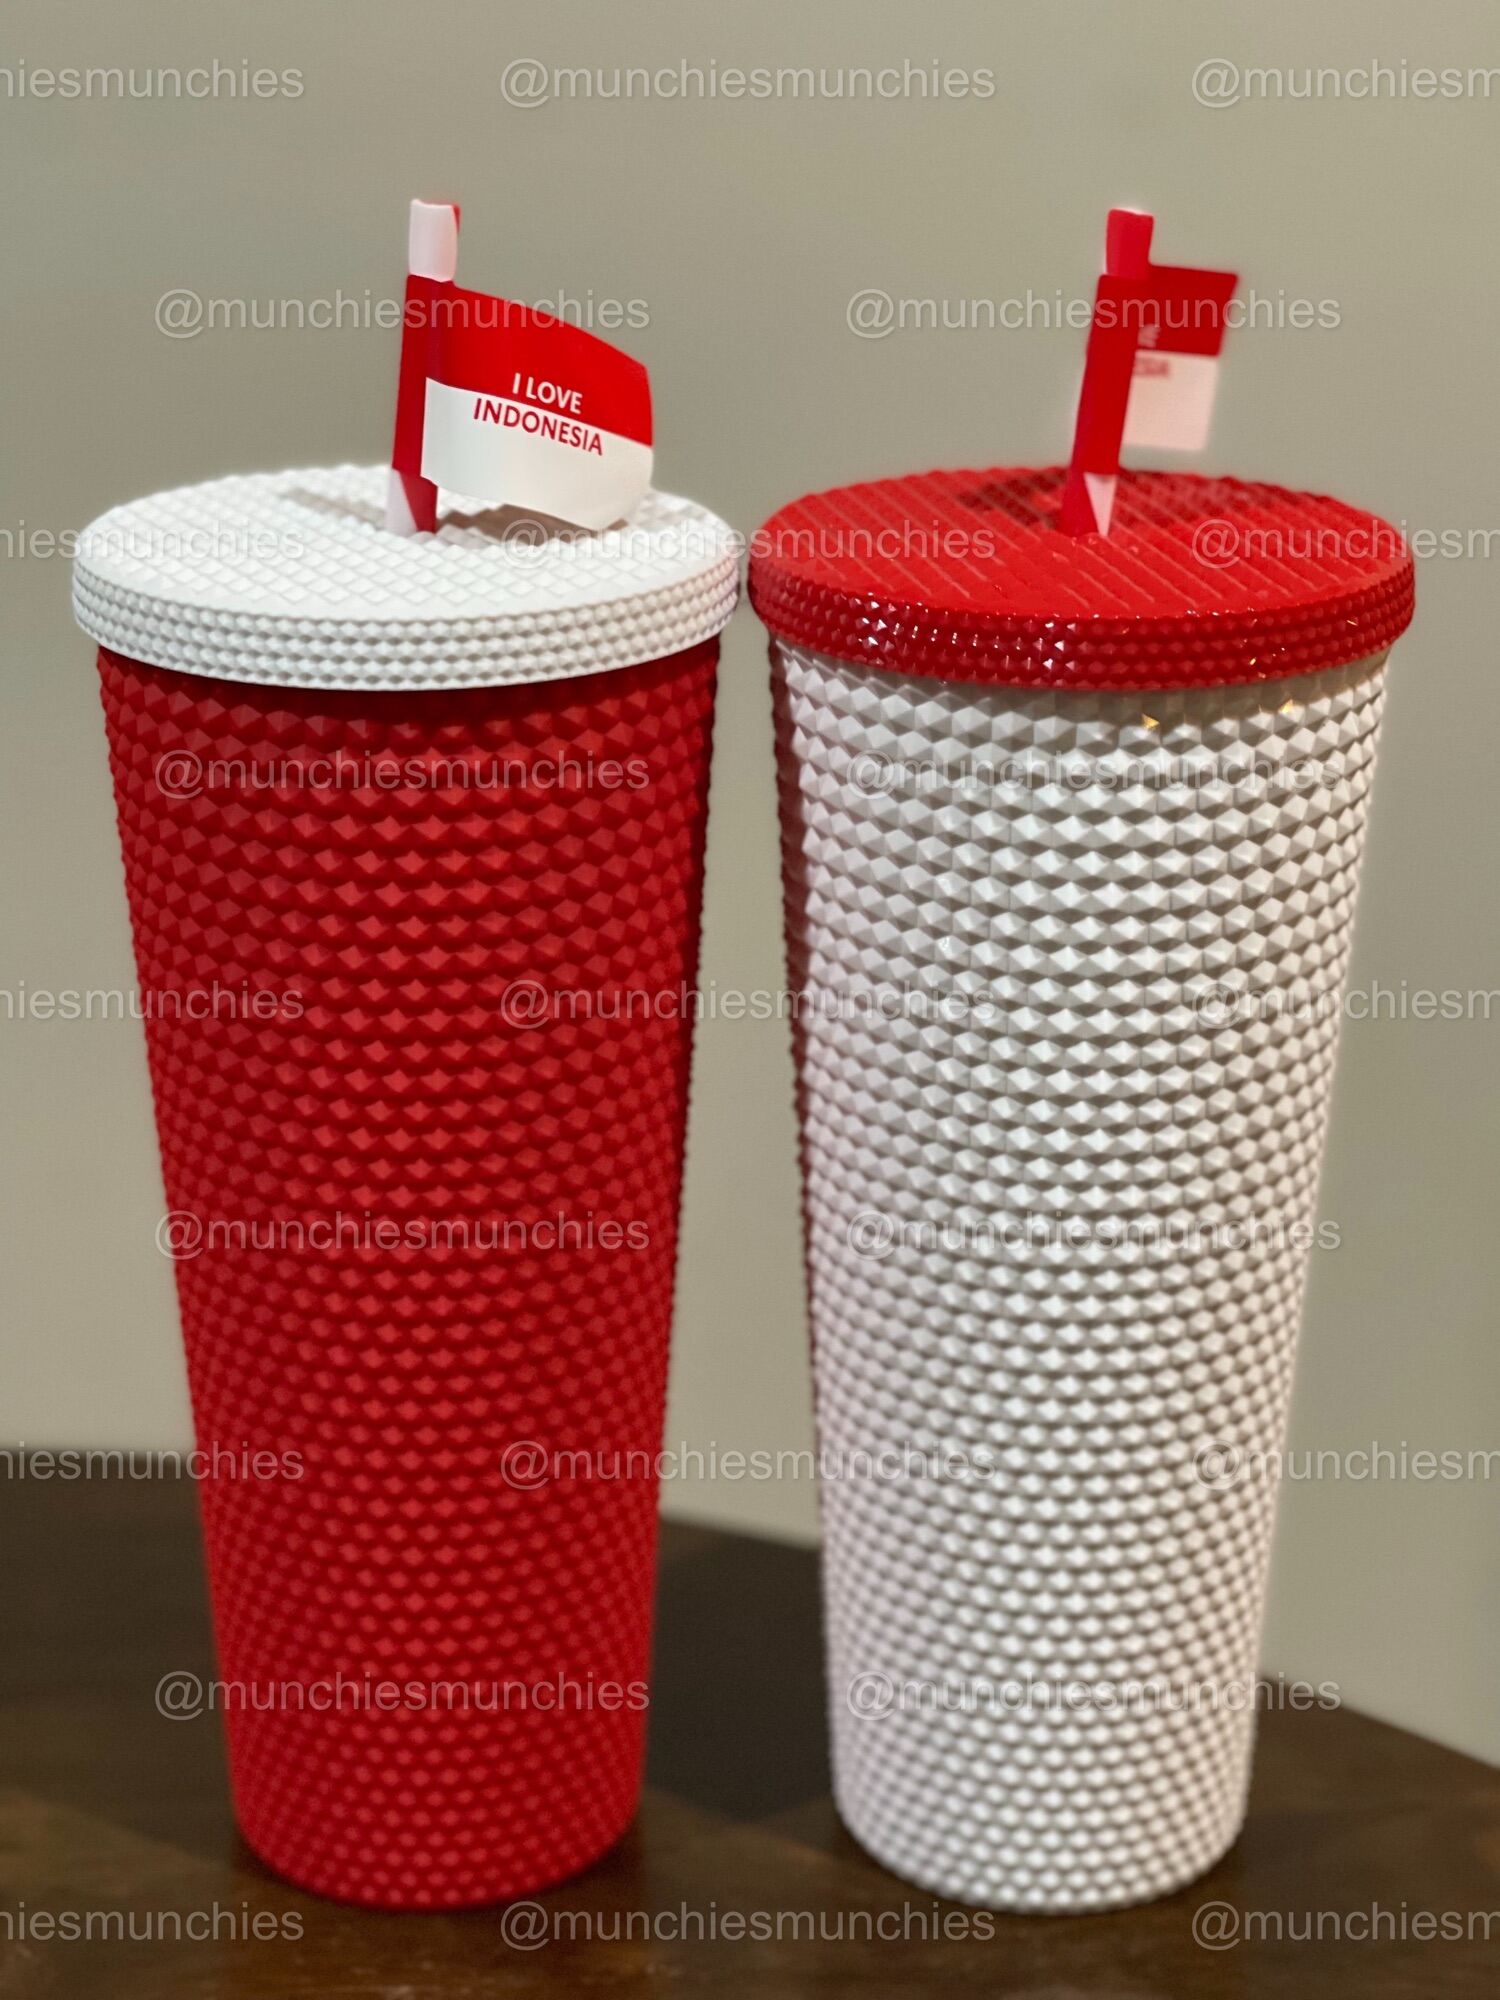 2021 Starbucks Indonesia Soft Touch Matte Red White Flag Studded Cup 24oz SKU